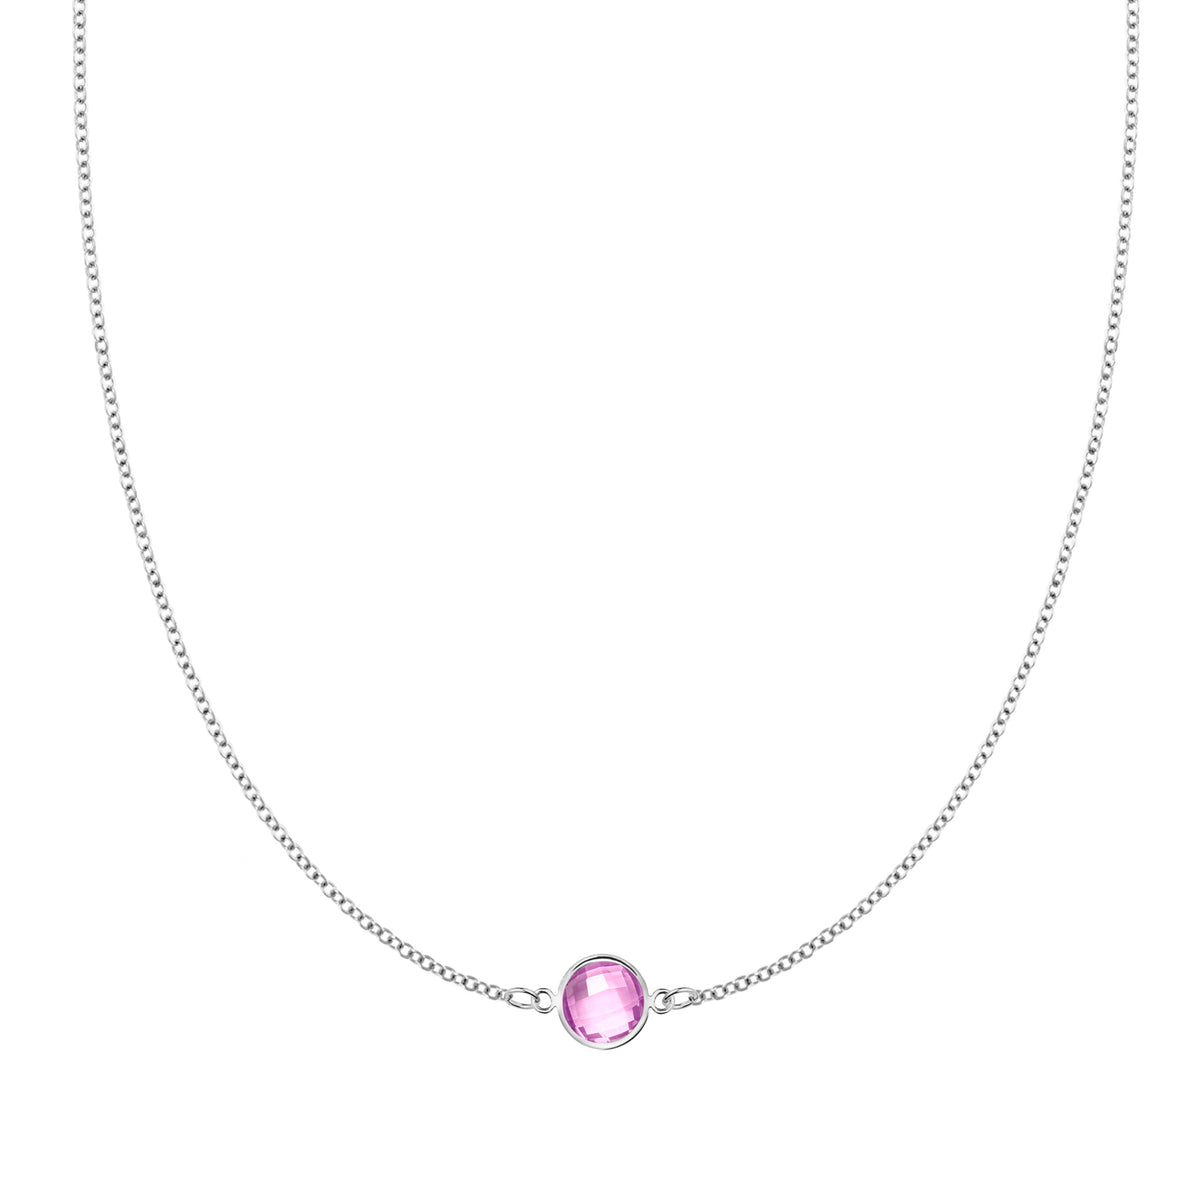 Grand Necklace 1 stone NEW Pink